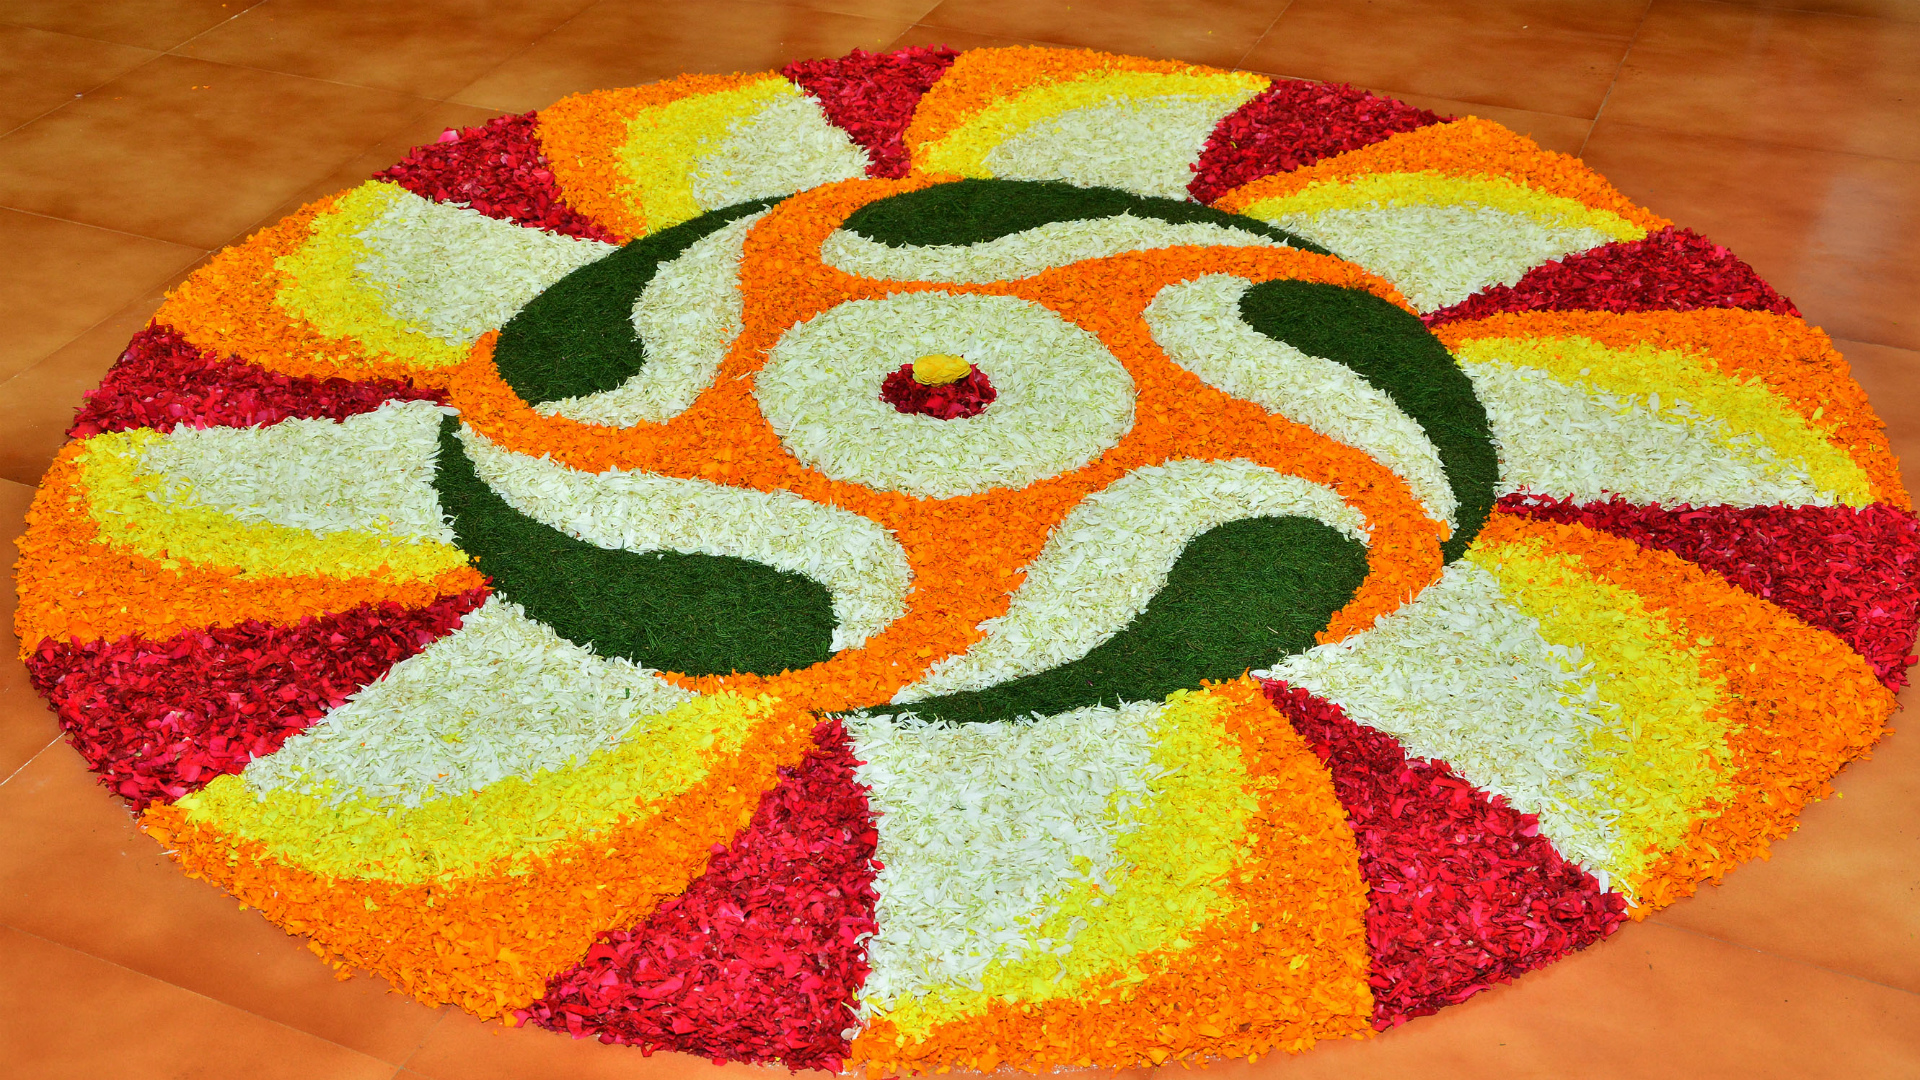 Onam 2020 Pookalam Designs For Beginners Easy And New Rangoli Designs With Flowers For Thiru Onam View Images And Videos Latestly,Fashion Design Kit For Kids